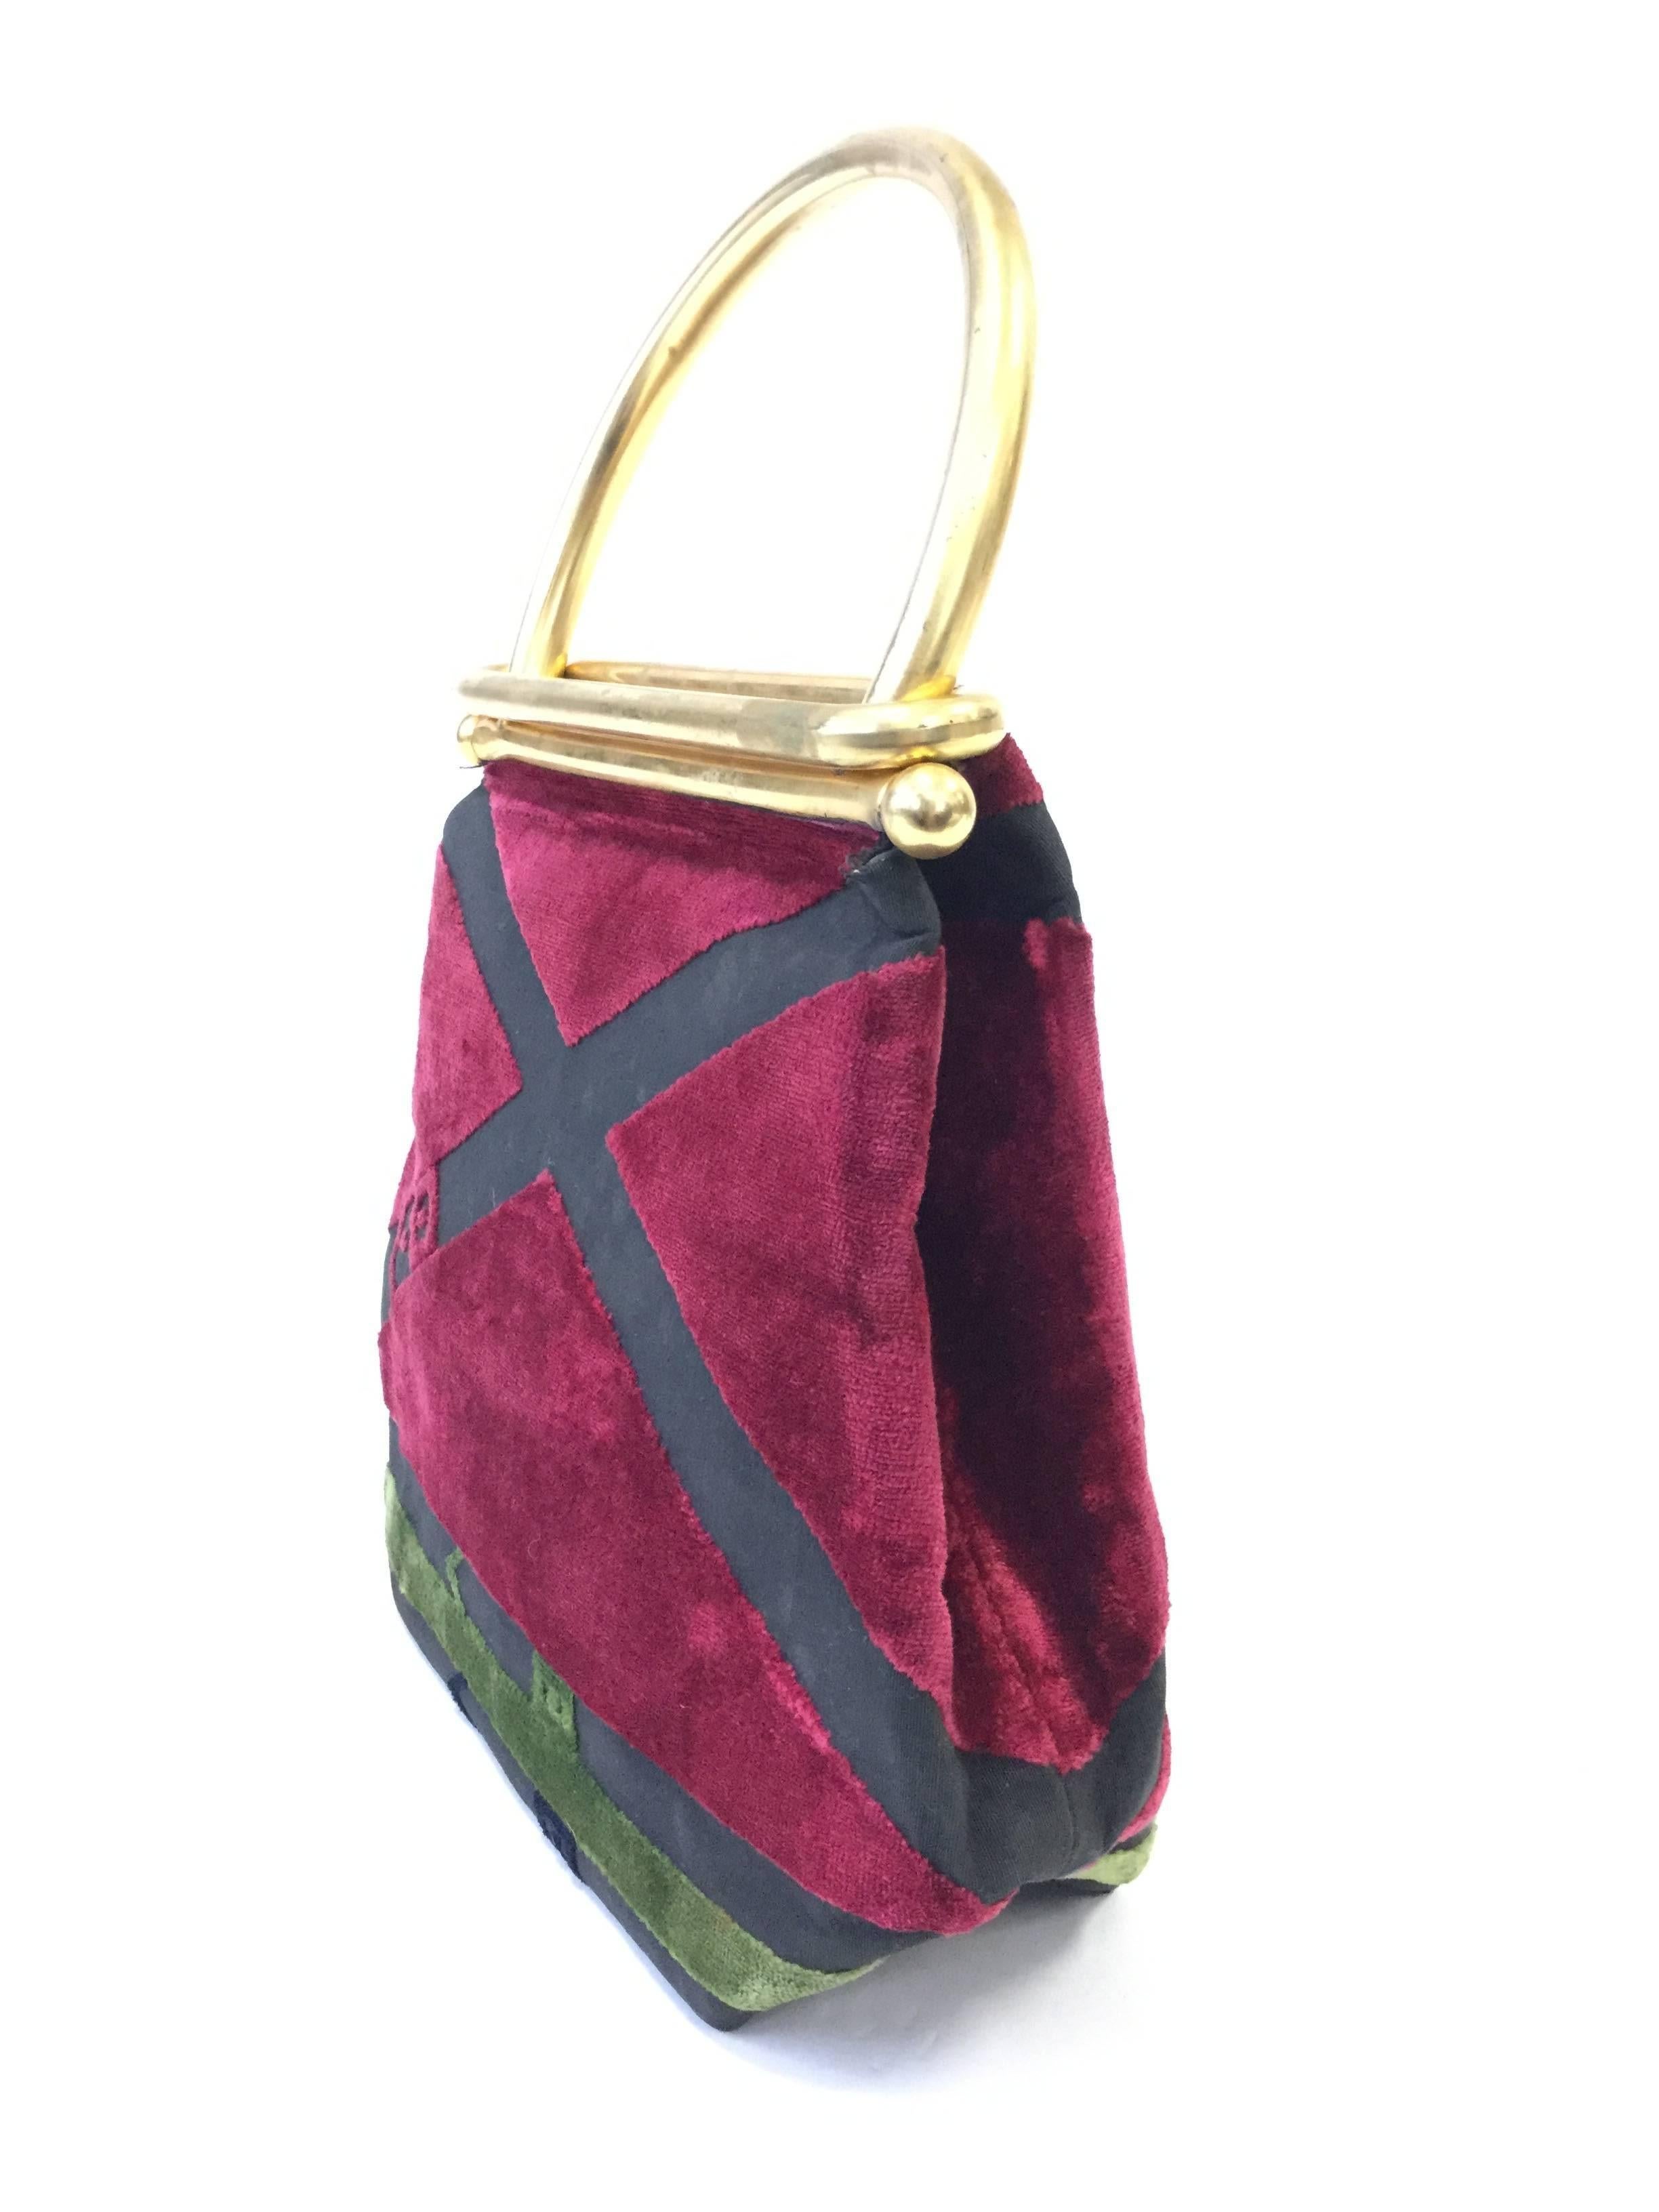 
Fun and funky Roberta di Camerino handbag! This a-frame handbag features an ingenious gold tone a sliding lock hardware handle and a velvet body. The body of the purse is cranberry red and sage green with belt designs crossing the velvet. The